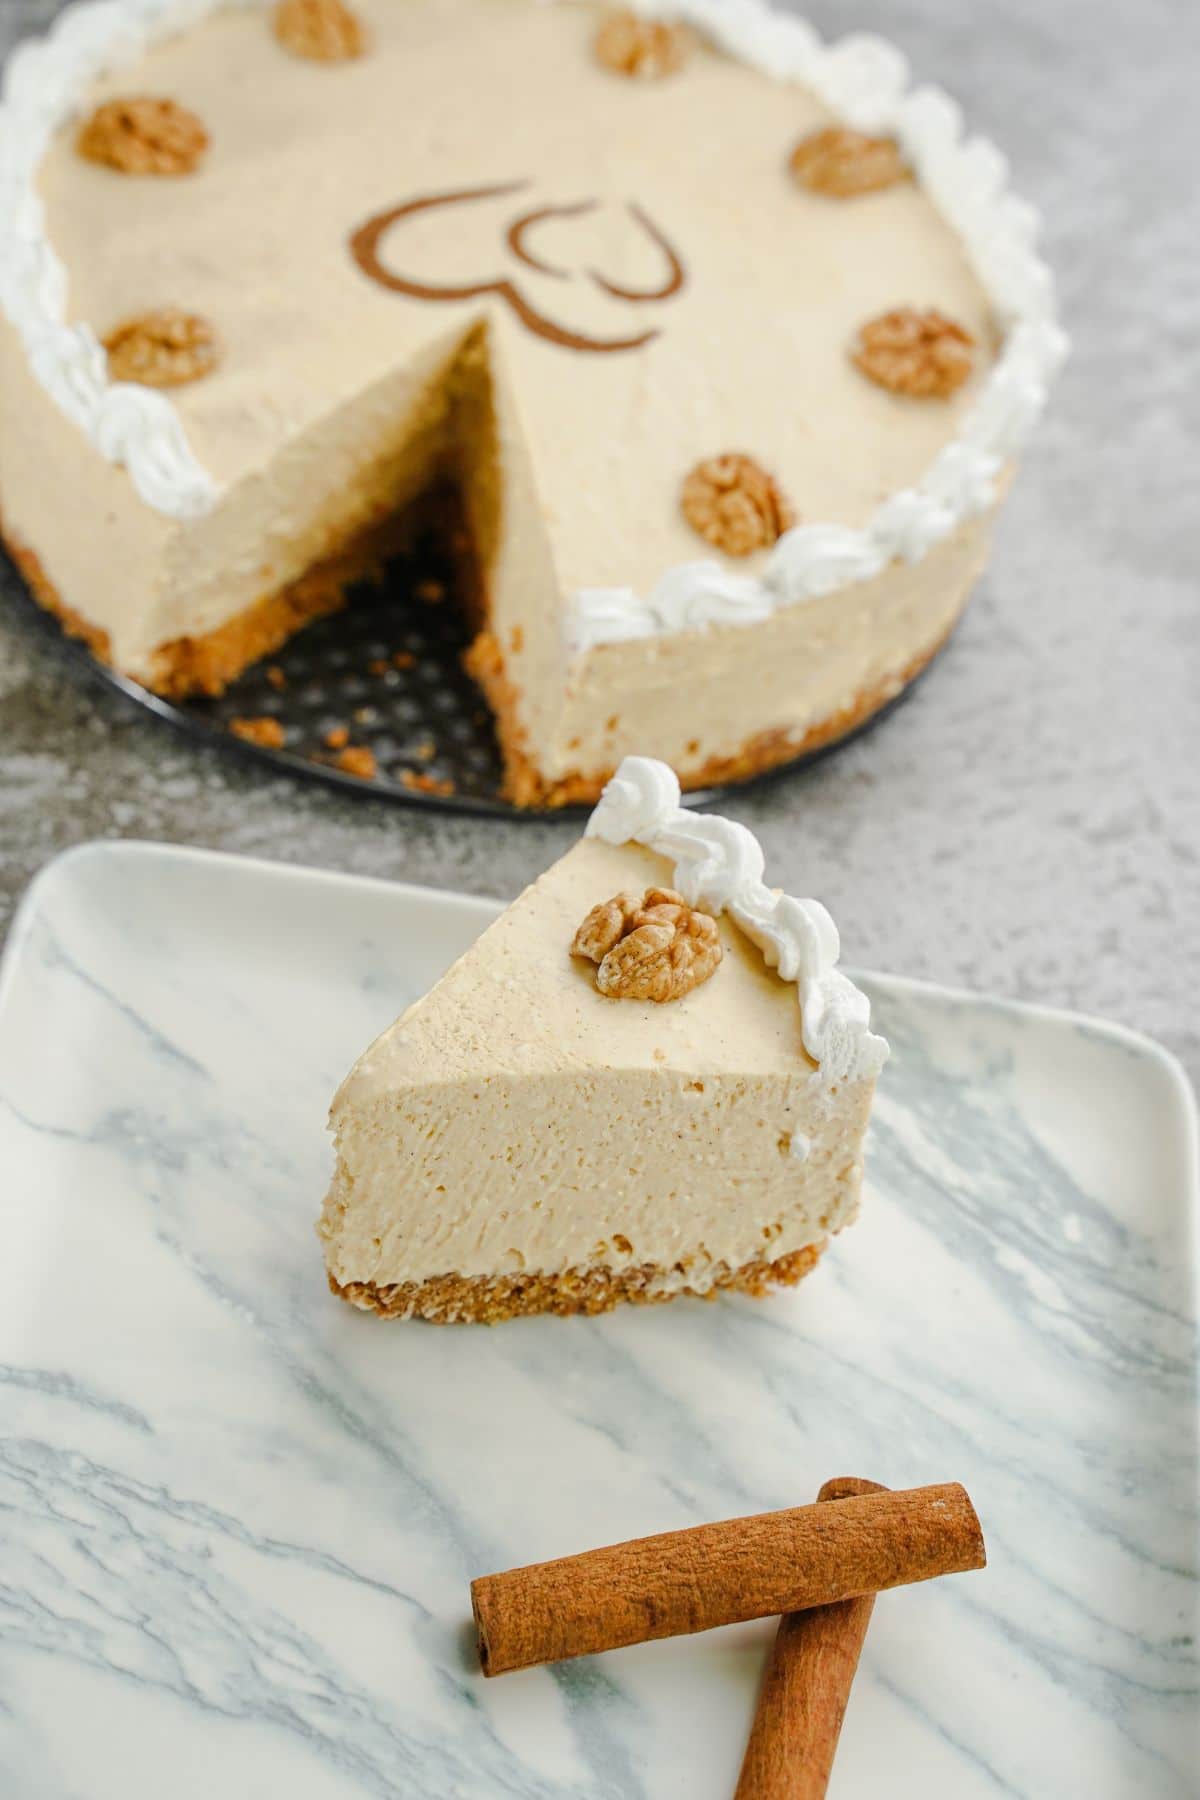 A piece of No Bake Pumpkin Cheesecake cut out from the whole cheesecake